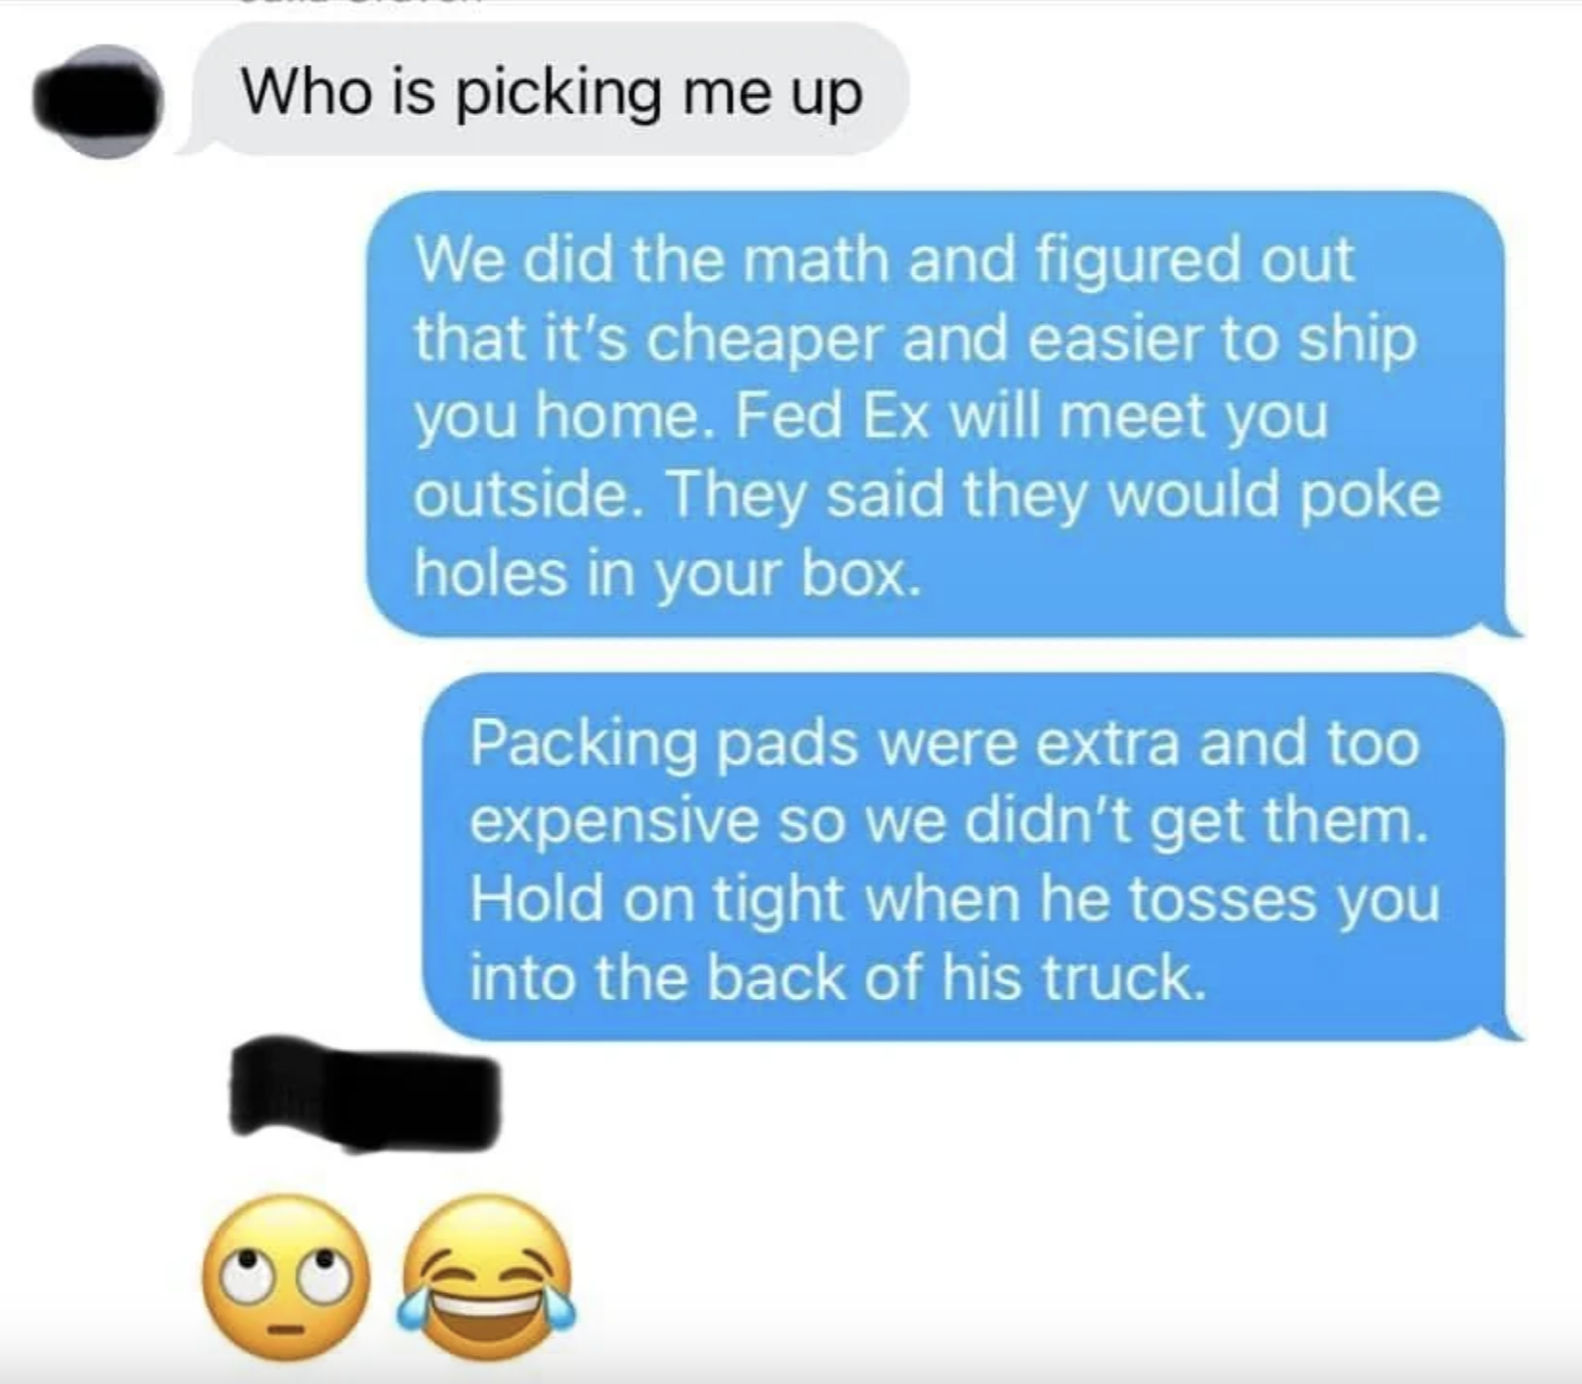 Text conversation humorously discussing shipping someone home via FedEx, mentioning no packing pads and poking holes in the box. Two emojis: an eye roll and a laughing face